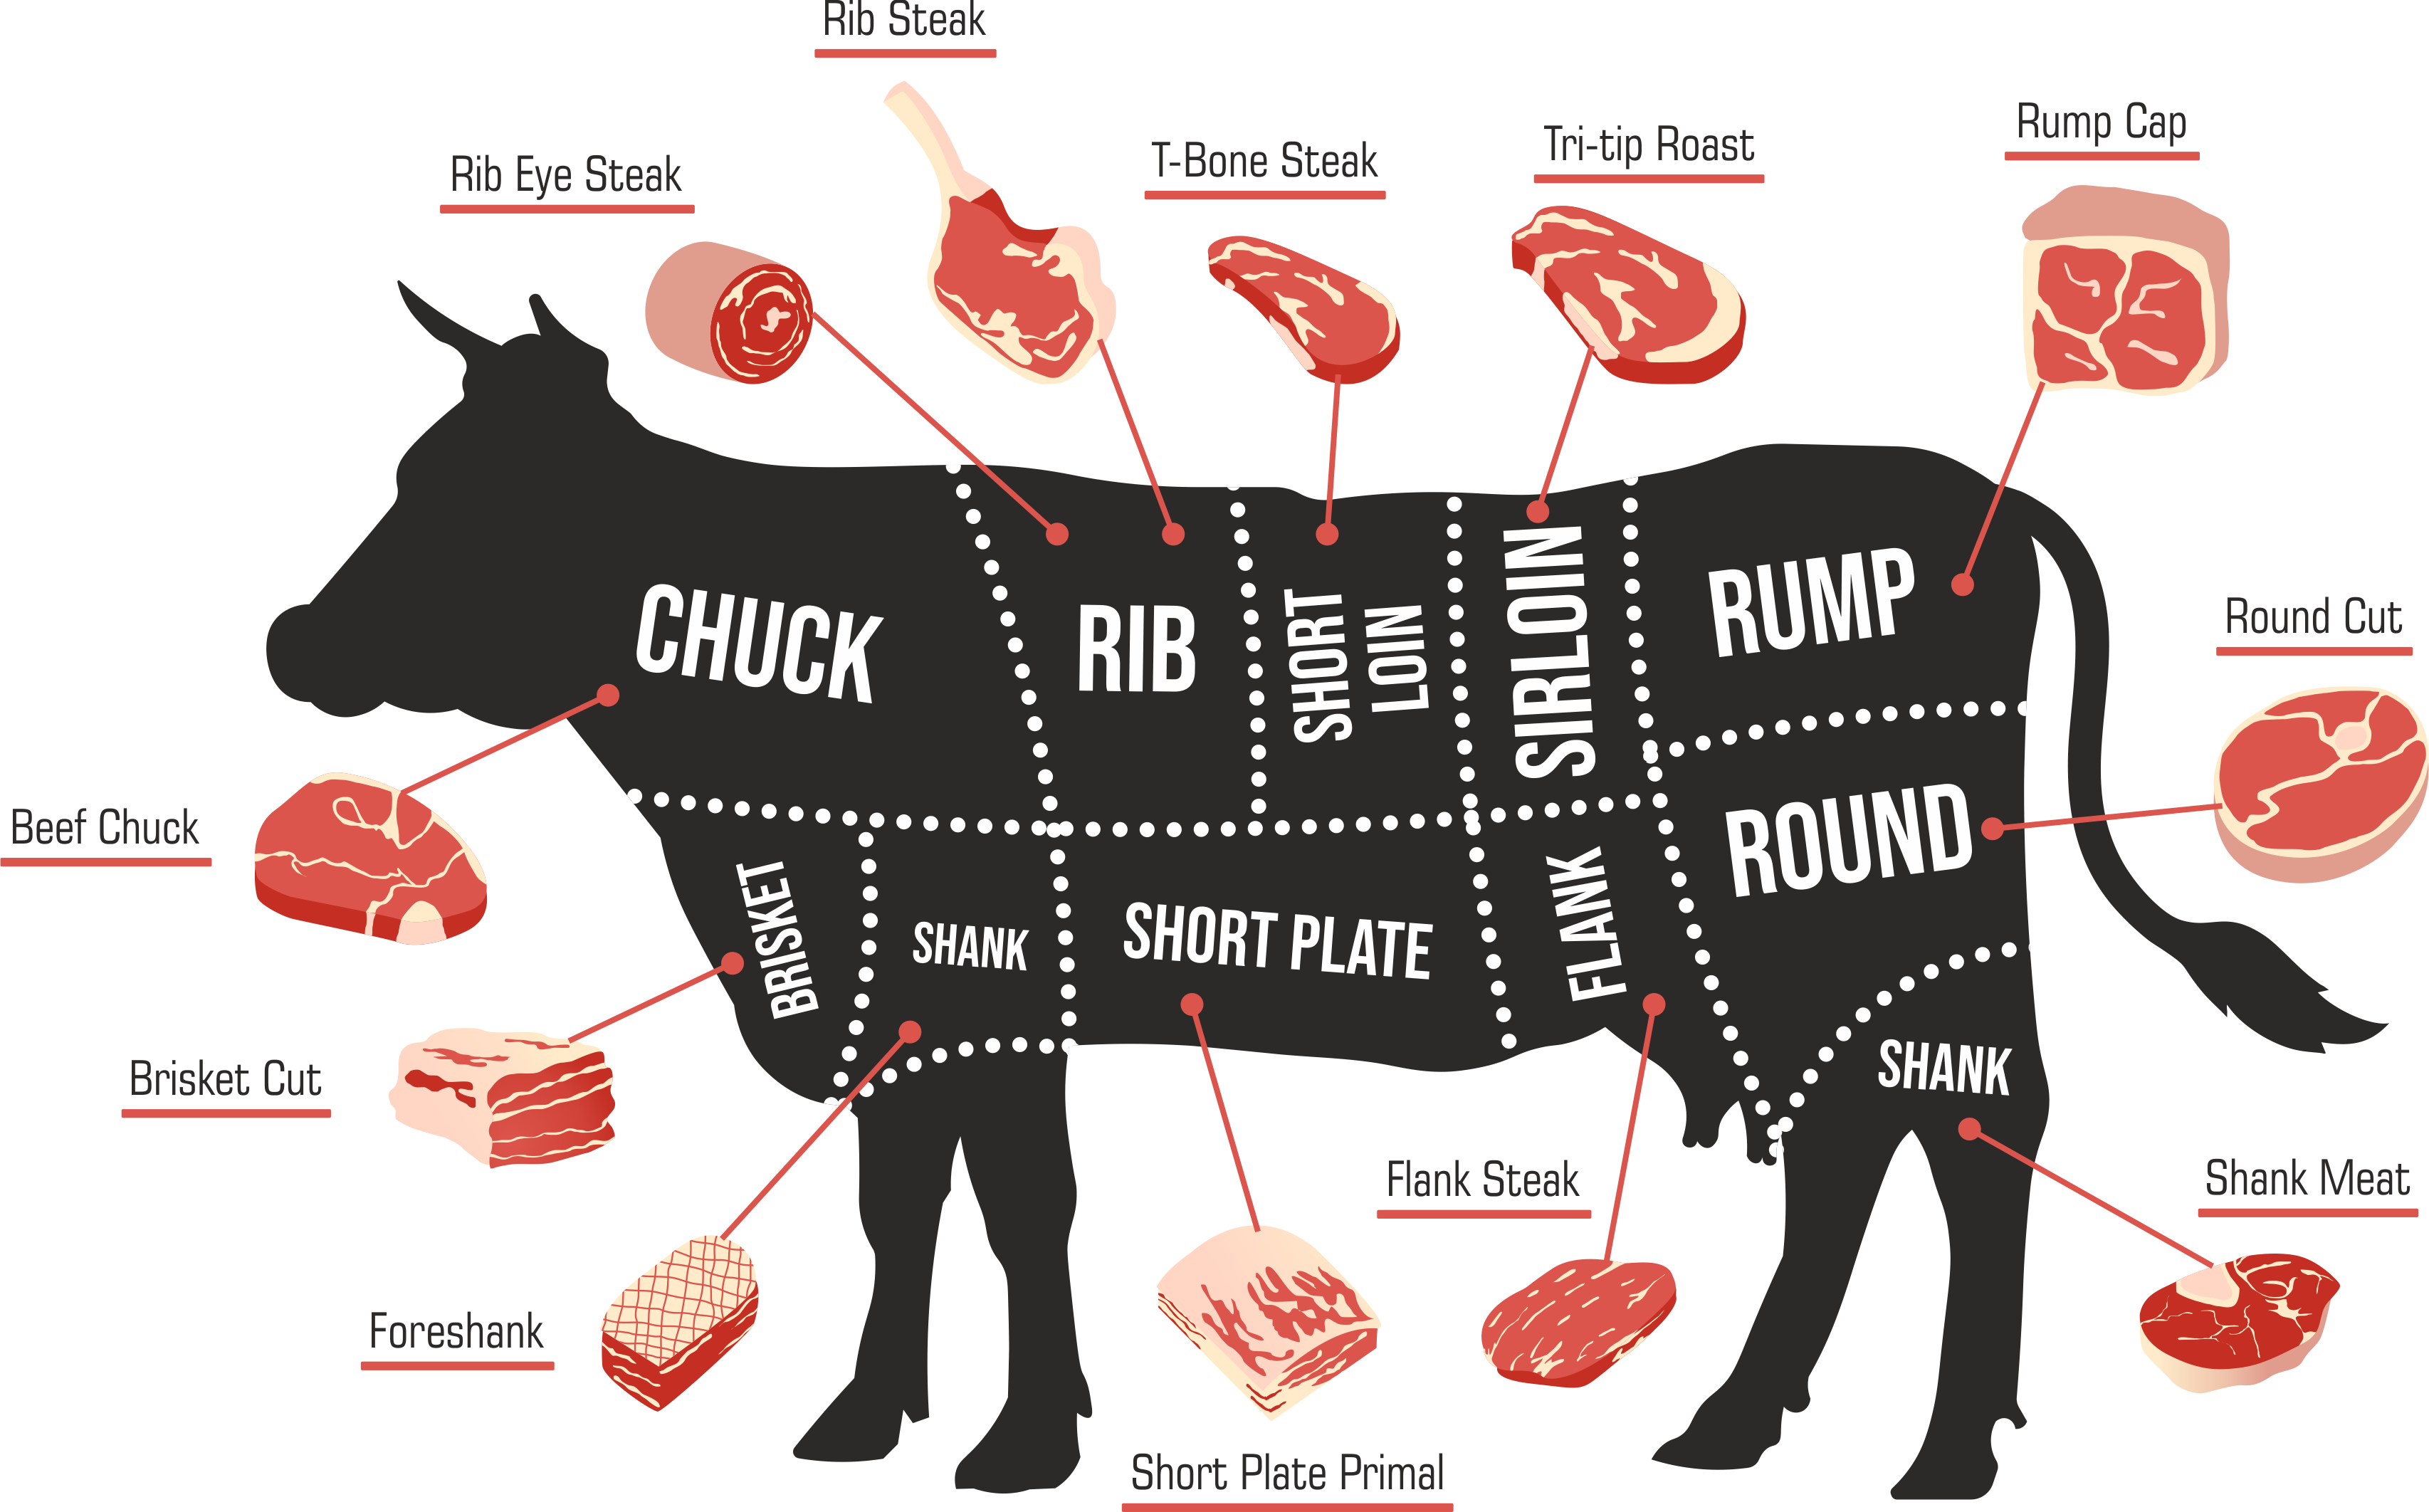 Learn What the Most Flavorful Cuts of Meat/Beef Are